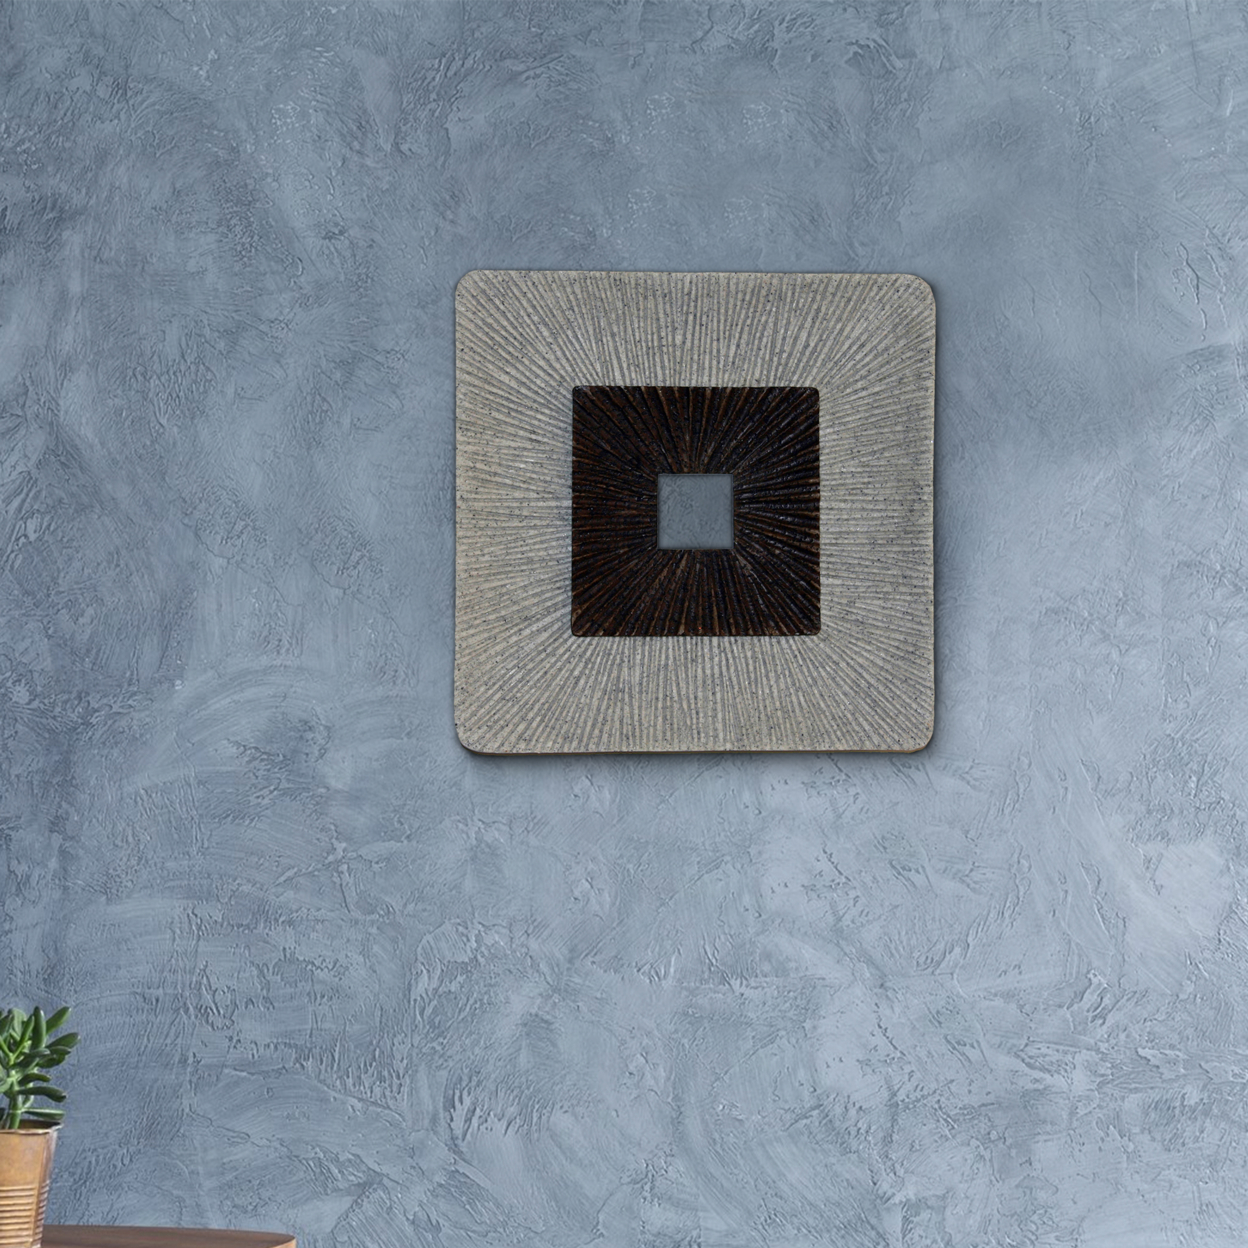 Square Shaped Wall Decor With Ribbed Details, Small, Brown And Gray- Saltoro Sherpi